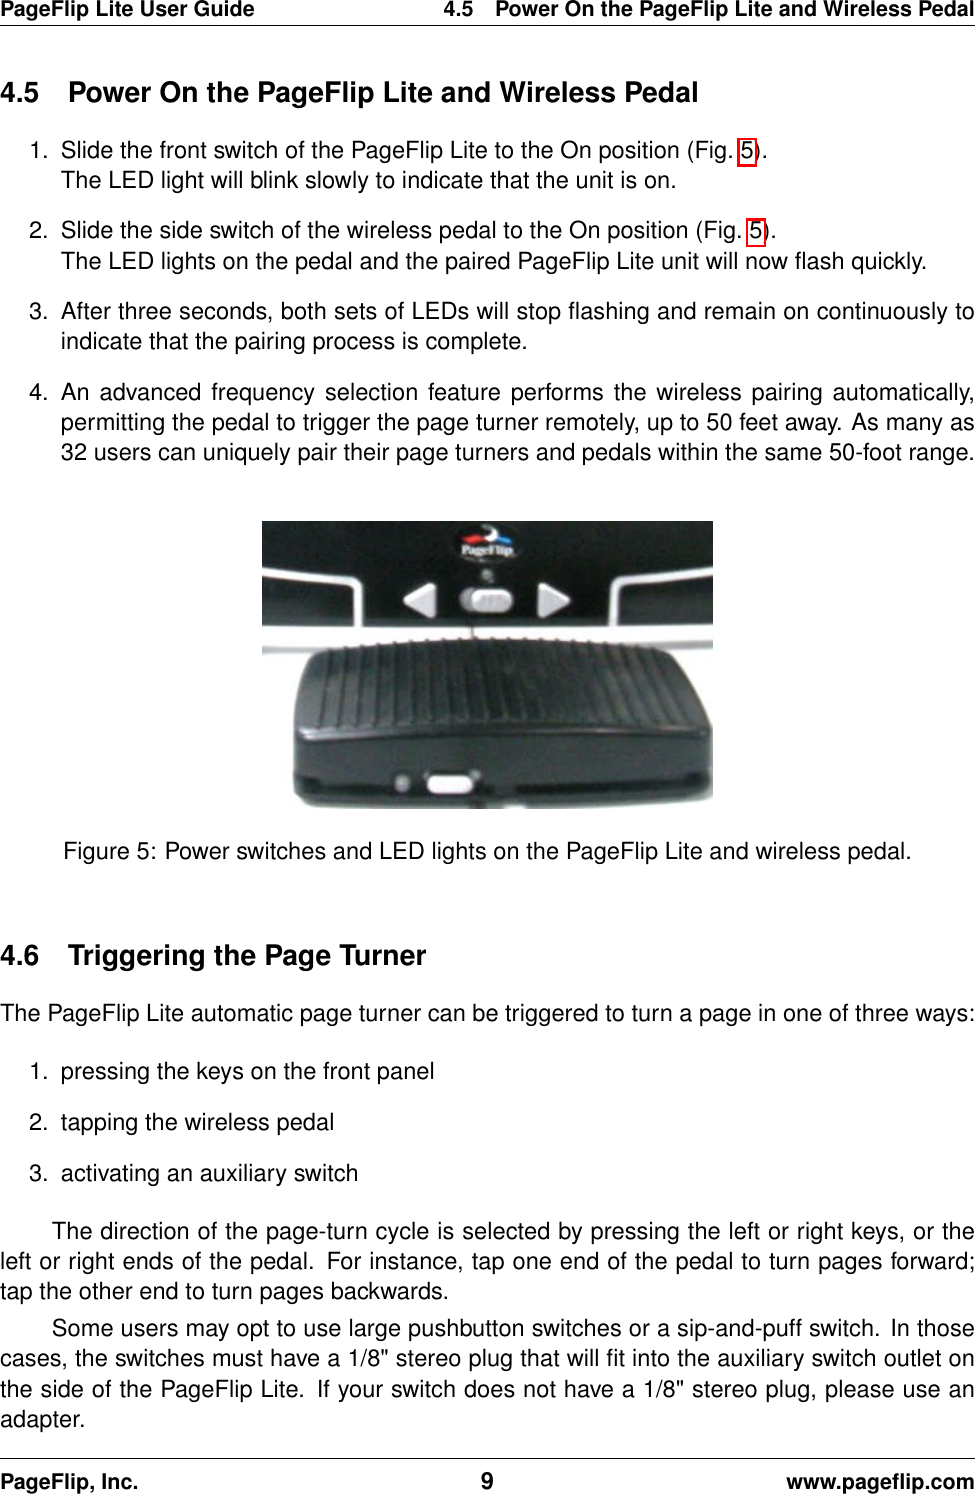 PageFlip Lite User Guide 4.5 Power On the PageFlip Lite and Wireless Pedal4.5 Power On the PageFlip Lite and Wireless Pedal1. Slide the front switch of the PageFlip Lite to the On position (Fig. 5).The LED light will blink slowly to indicate that the unit is on.2. Slide the side switch of the wireless pedal to the On position (Fig. 5).The LED lights on the pedal and the paired PageFlip Lite unit will now ﬂash quickly.3. After three seconds, both sets of LEDs will stop ﬂashing and remain on continuously toindicate that the pairing process is complete.4. An advanced frequency selection feature performs the wireless pairing automatically,permitting the pedal to trigger the page turner remotely, up to 50 feet away. As many as32 users can uniquely pair their page turners and pedals within the same 50-foot range.Figure 5: Power switches and LED lights on the PageFlip Lite and wireless pedal.4.6 Triggering the Page TurnerThe PageFlip Lite automatic page turner can be triggered to turn a page in one of three ways:1. pressing the keys on the front panel2. tapping the wireless pedal3. activating an auxiliary switchThe direction of the page-turn cycle is selected by pressing the left or right keys, or theleft or right ends of the pedal. For instance, tap one end of the pedal to turn pages forward;tap the other end to turn pages backwards.Some users may opt to use large pushbutton switches or a sip-and-puff switch. In thosecases, the switches must have a 1/8&quot; stereo plug that will ﬁt into the auxiliary switch outlet onthe side of the PageFlip Lite. If your switch does not have a 1/8&quot; stereo plug, please use anadapter.PageFlip, Inc. 9www.pageﬂip.com